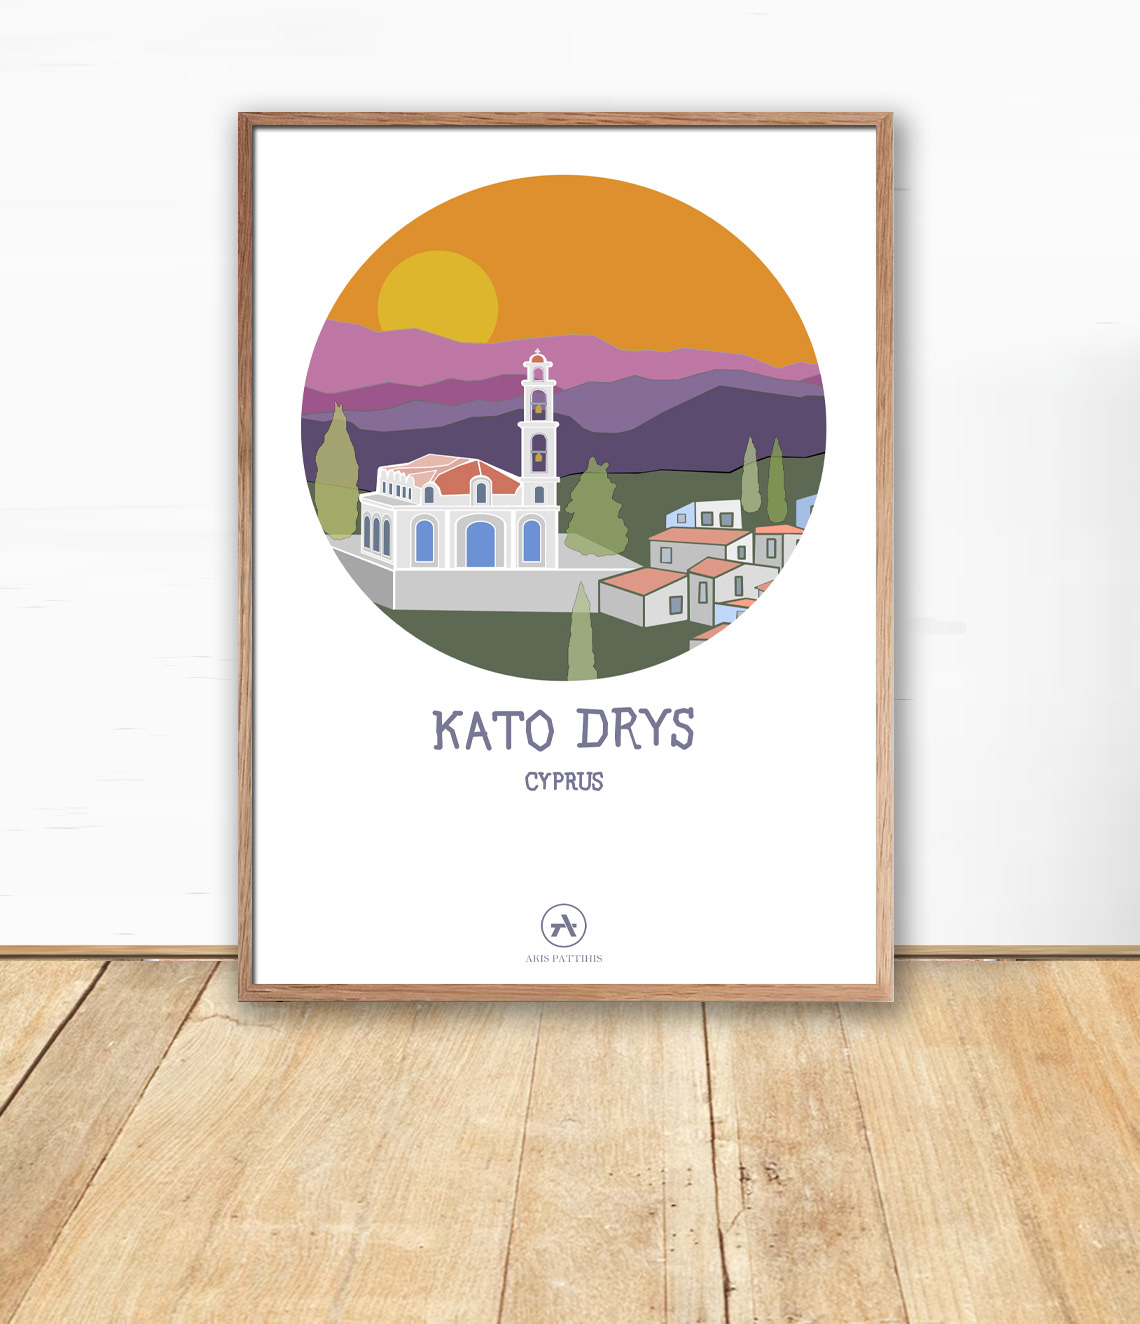 Illustration of the iconic Sunset view of Kato Drys Village in Cyprus and Agios Charalambos Church.